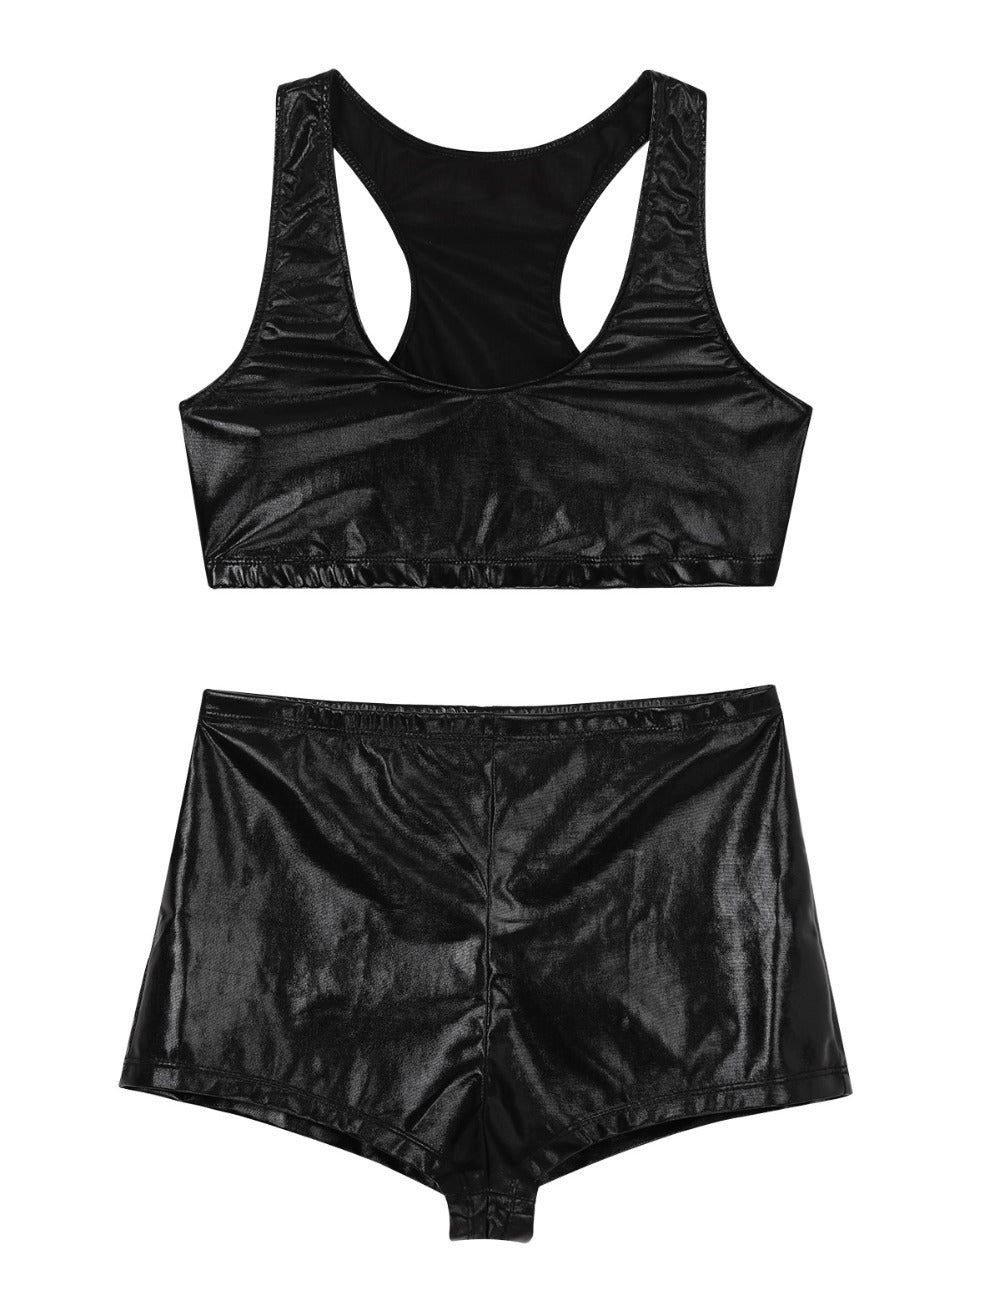 Women Pole Dance Intimate Clothing / Short Black Crop Top Shiny Metallic Sexy Rave Outfits - HARD'N'HEAVY